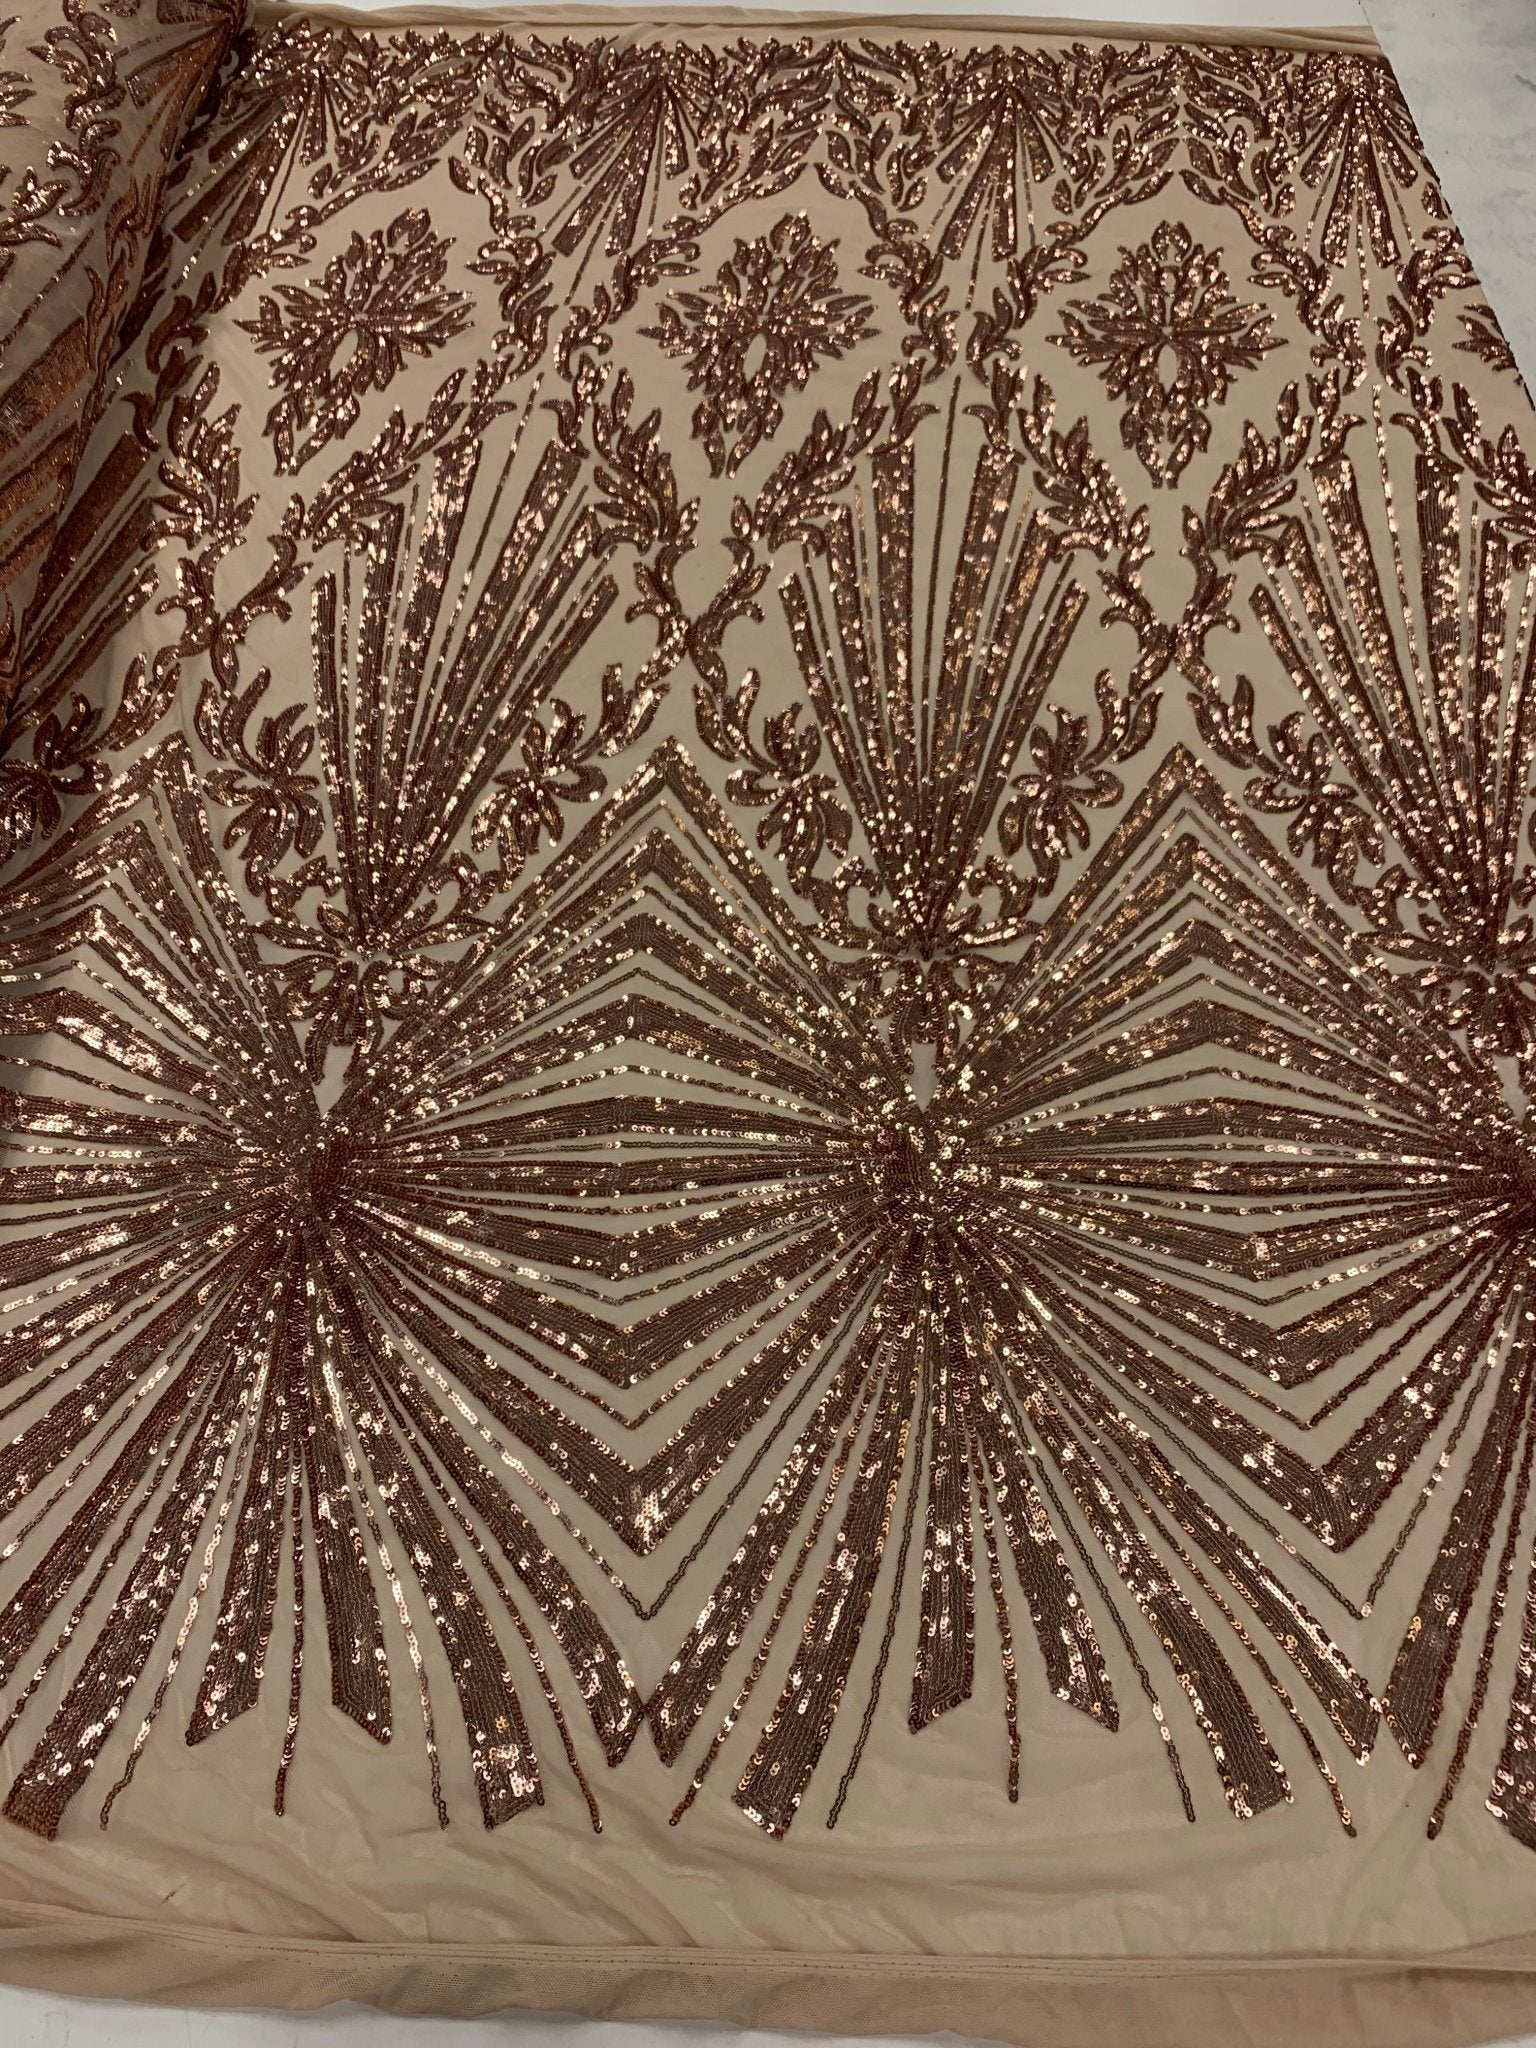 Rose Gold Luxury Stretch Sequin Bridal Embroidery on Nude Mesh Lace FabricICEFABRICICE FABRICSRose GoldRose Gold Luxury Stretch Sequin Bridal Embroidery on Nude Mesh Lace Fabric ICEFABRIC